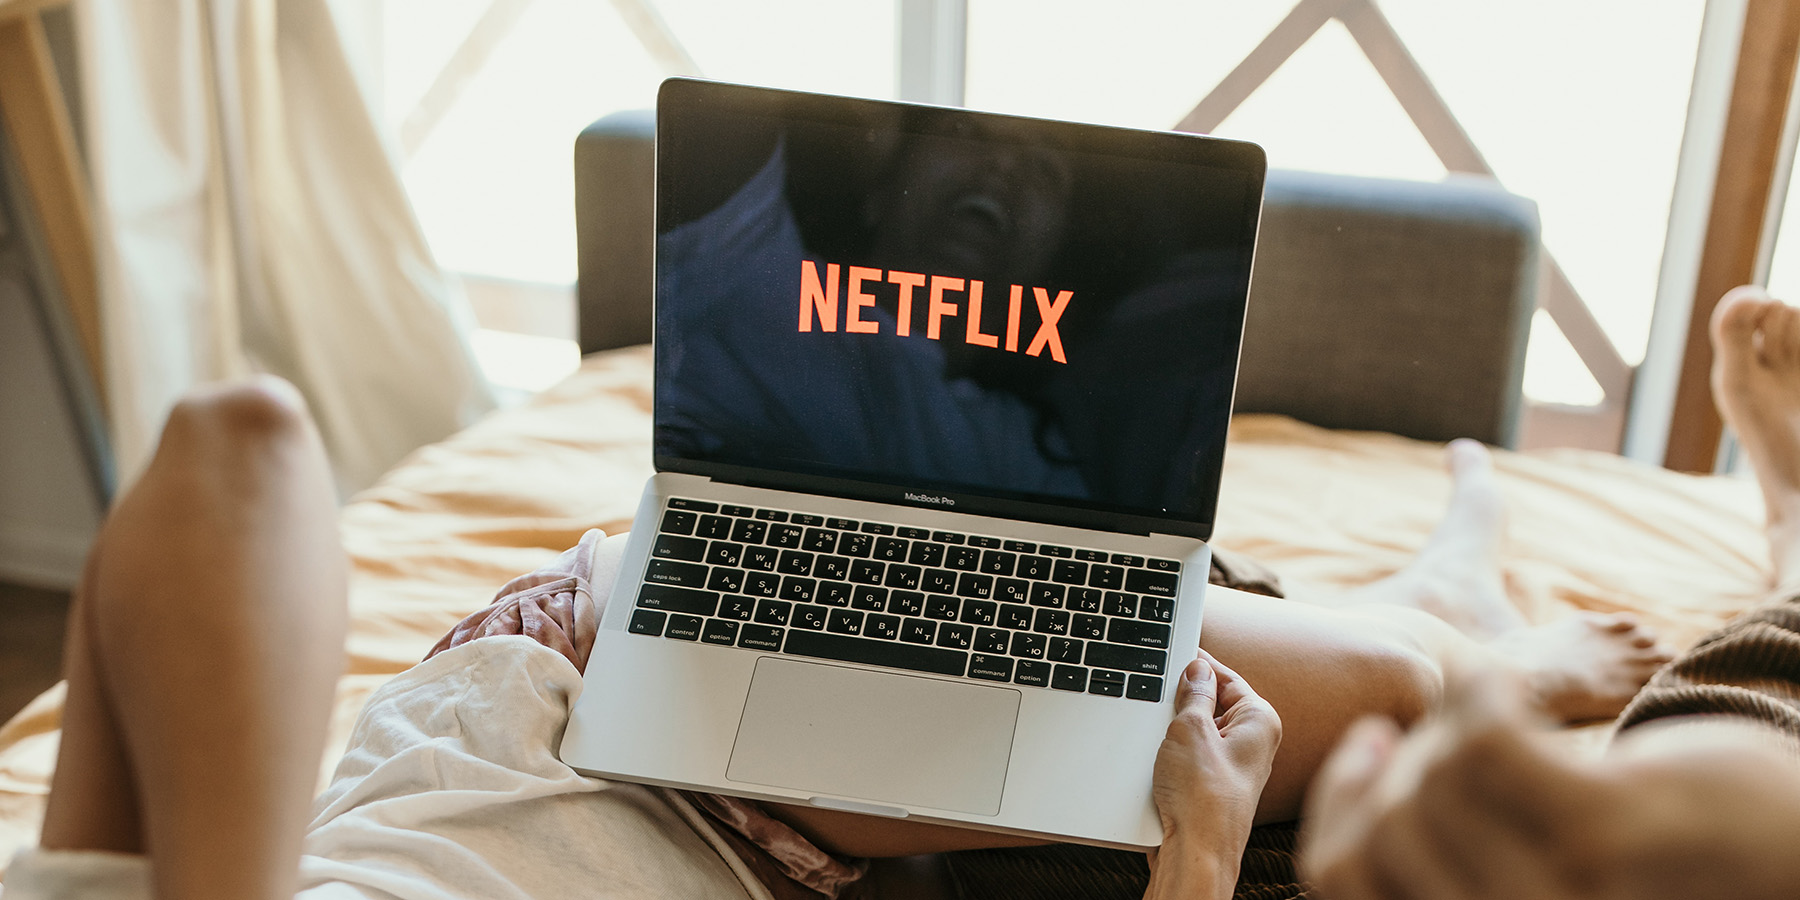 Porter’s Five Forces Analysis of Netflix